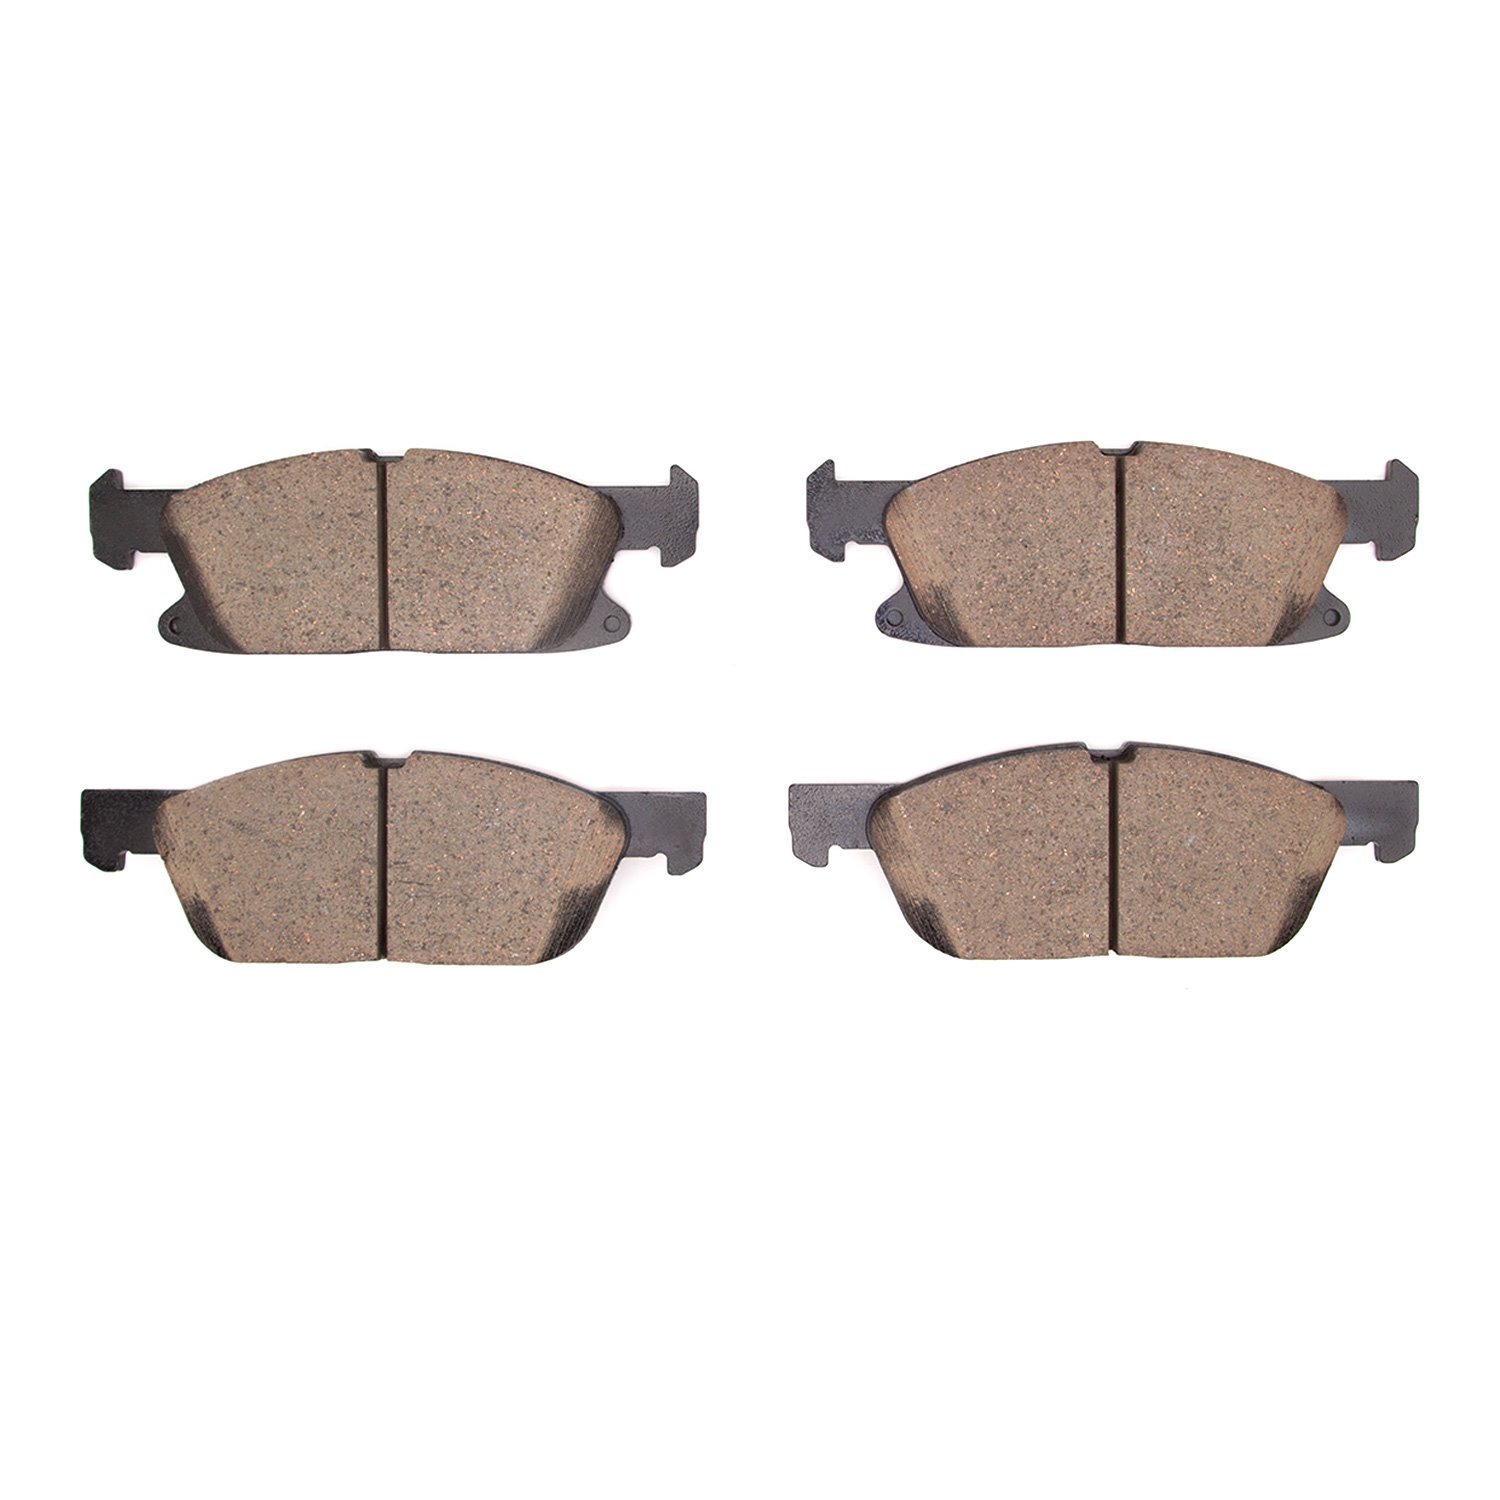 1311-2180-00 3000-Series Semi-Metallic Brake Pads, Fits Select Ford/Lincoln/Mercury/Mazda, Position: Front